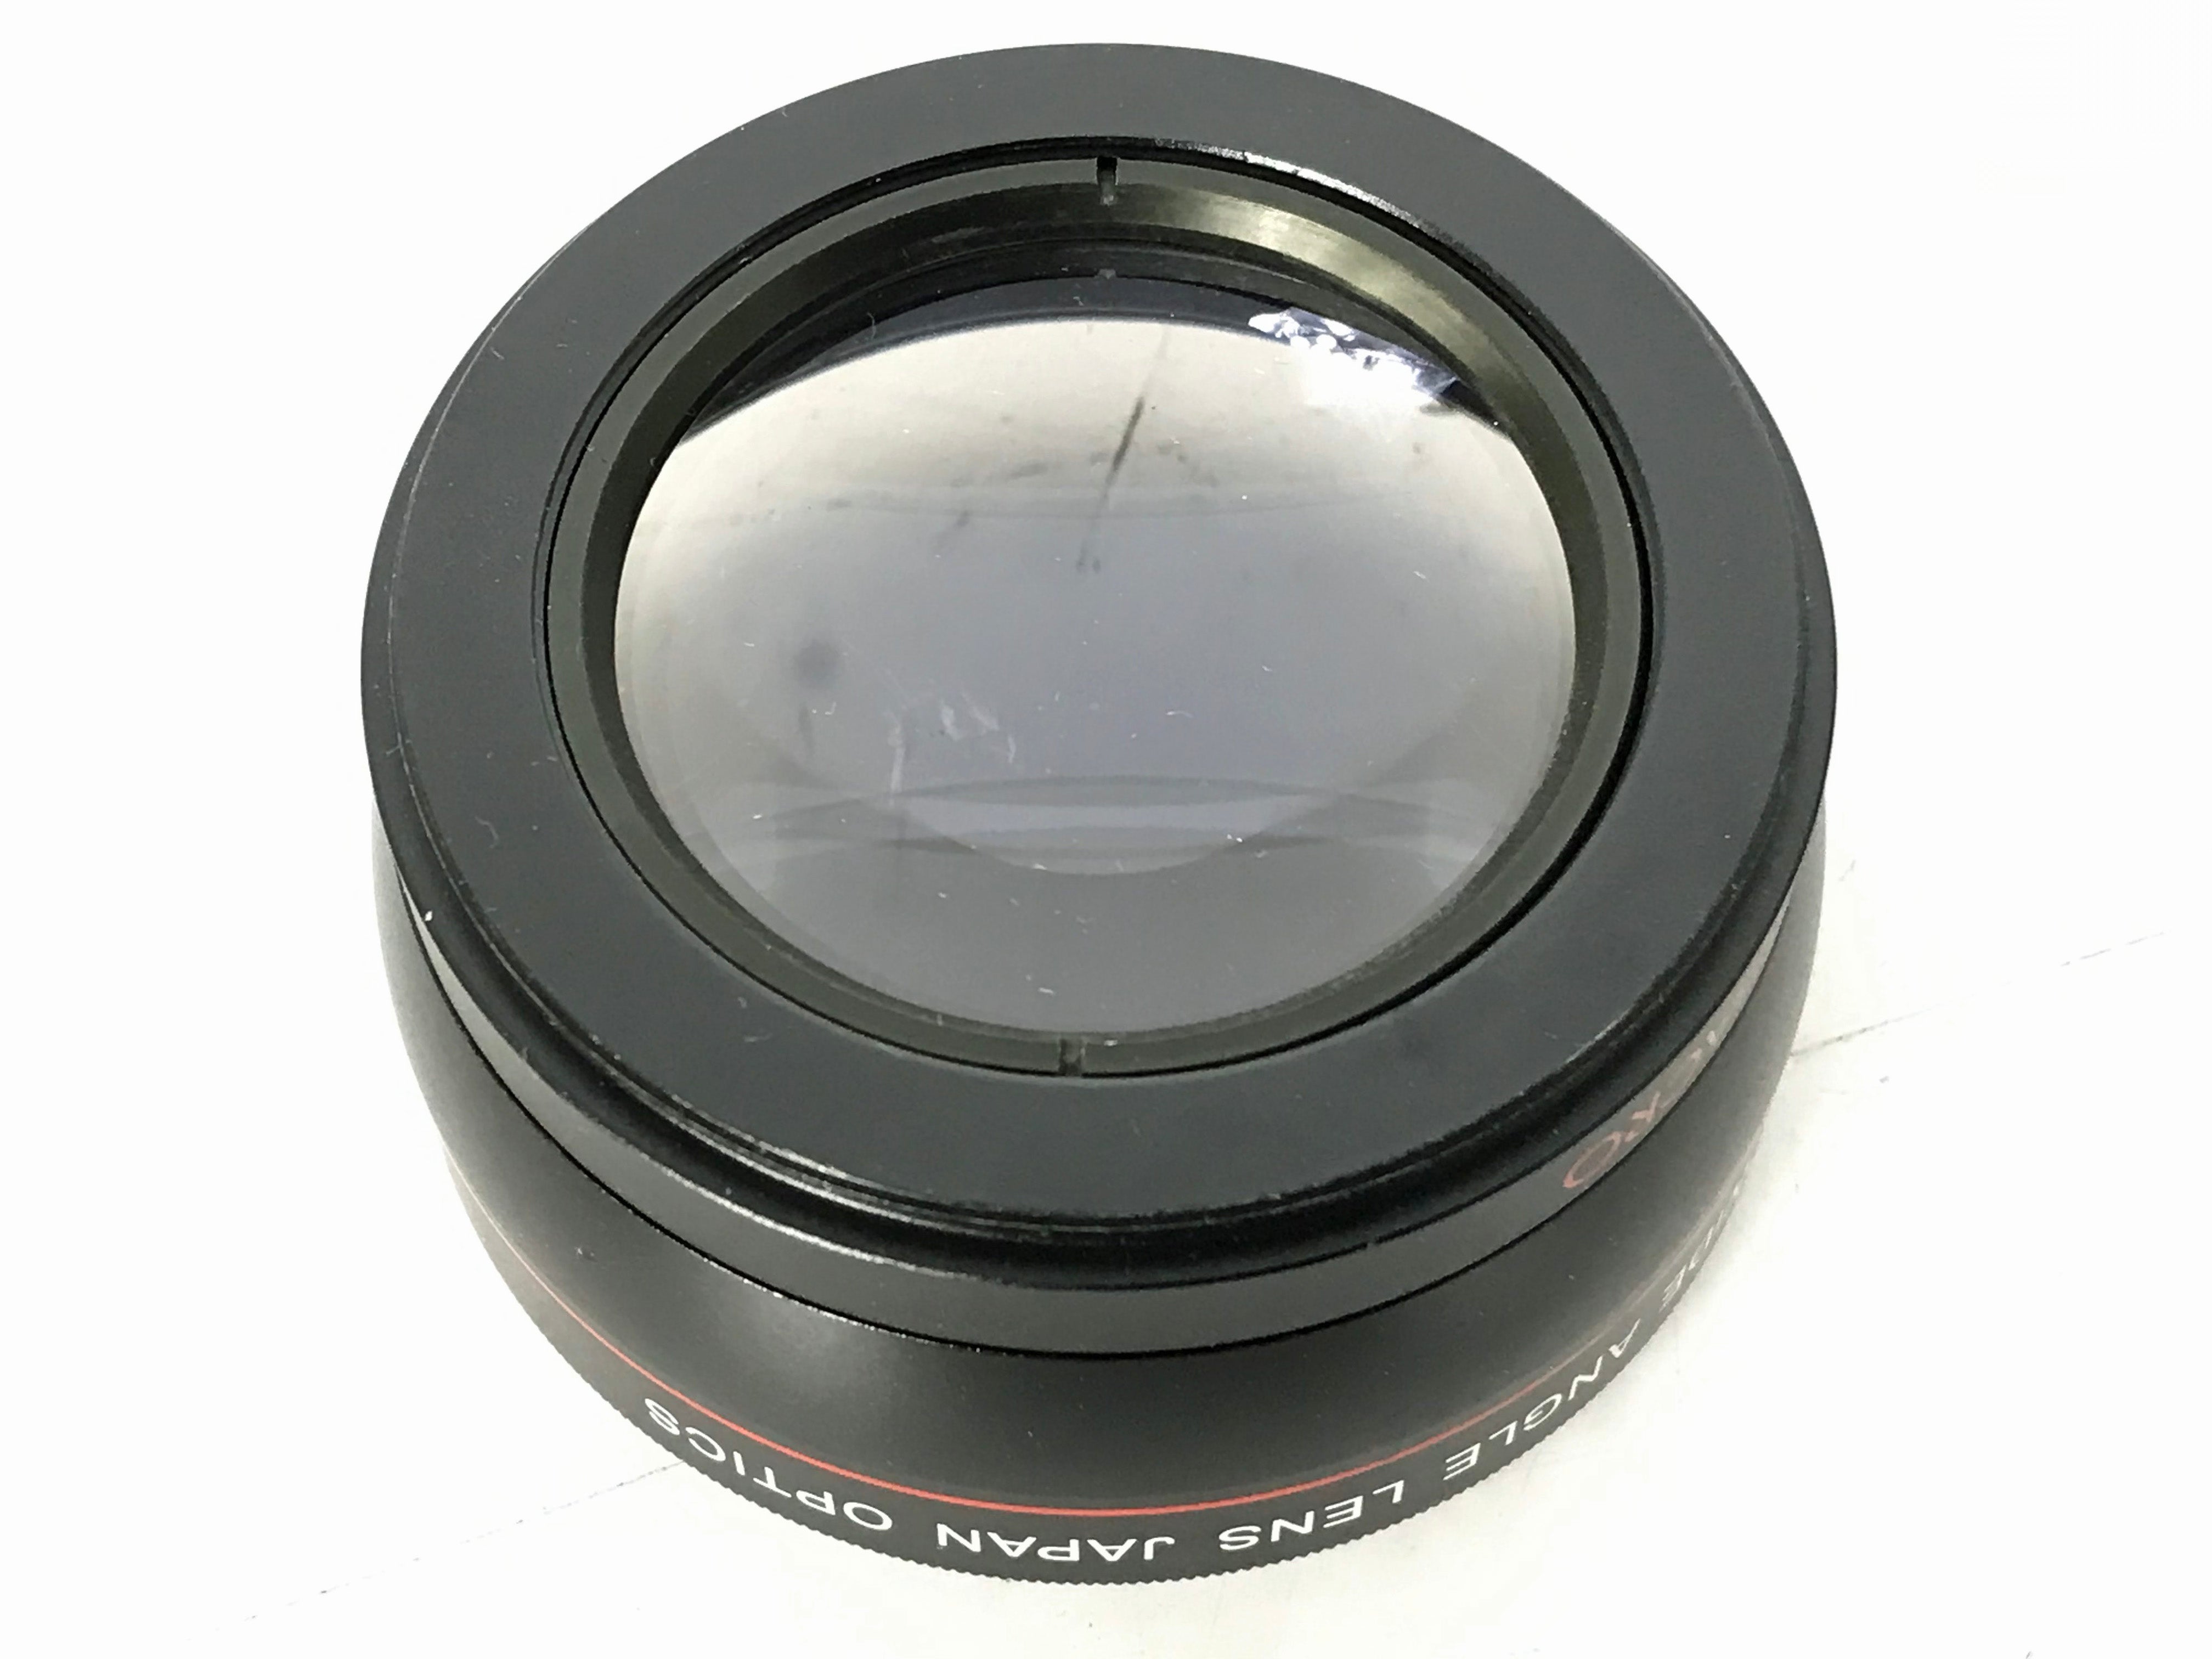 Vivitar 58mm 0.43x Wide Angle Attachment Lens w/ Carrying Case